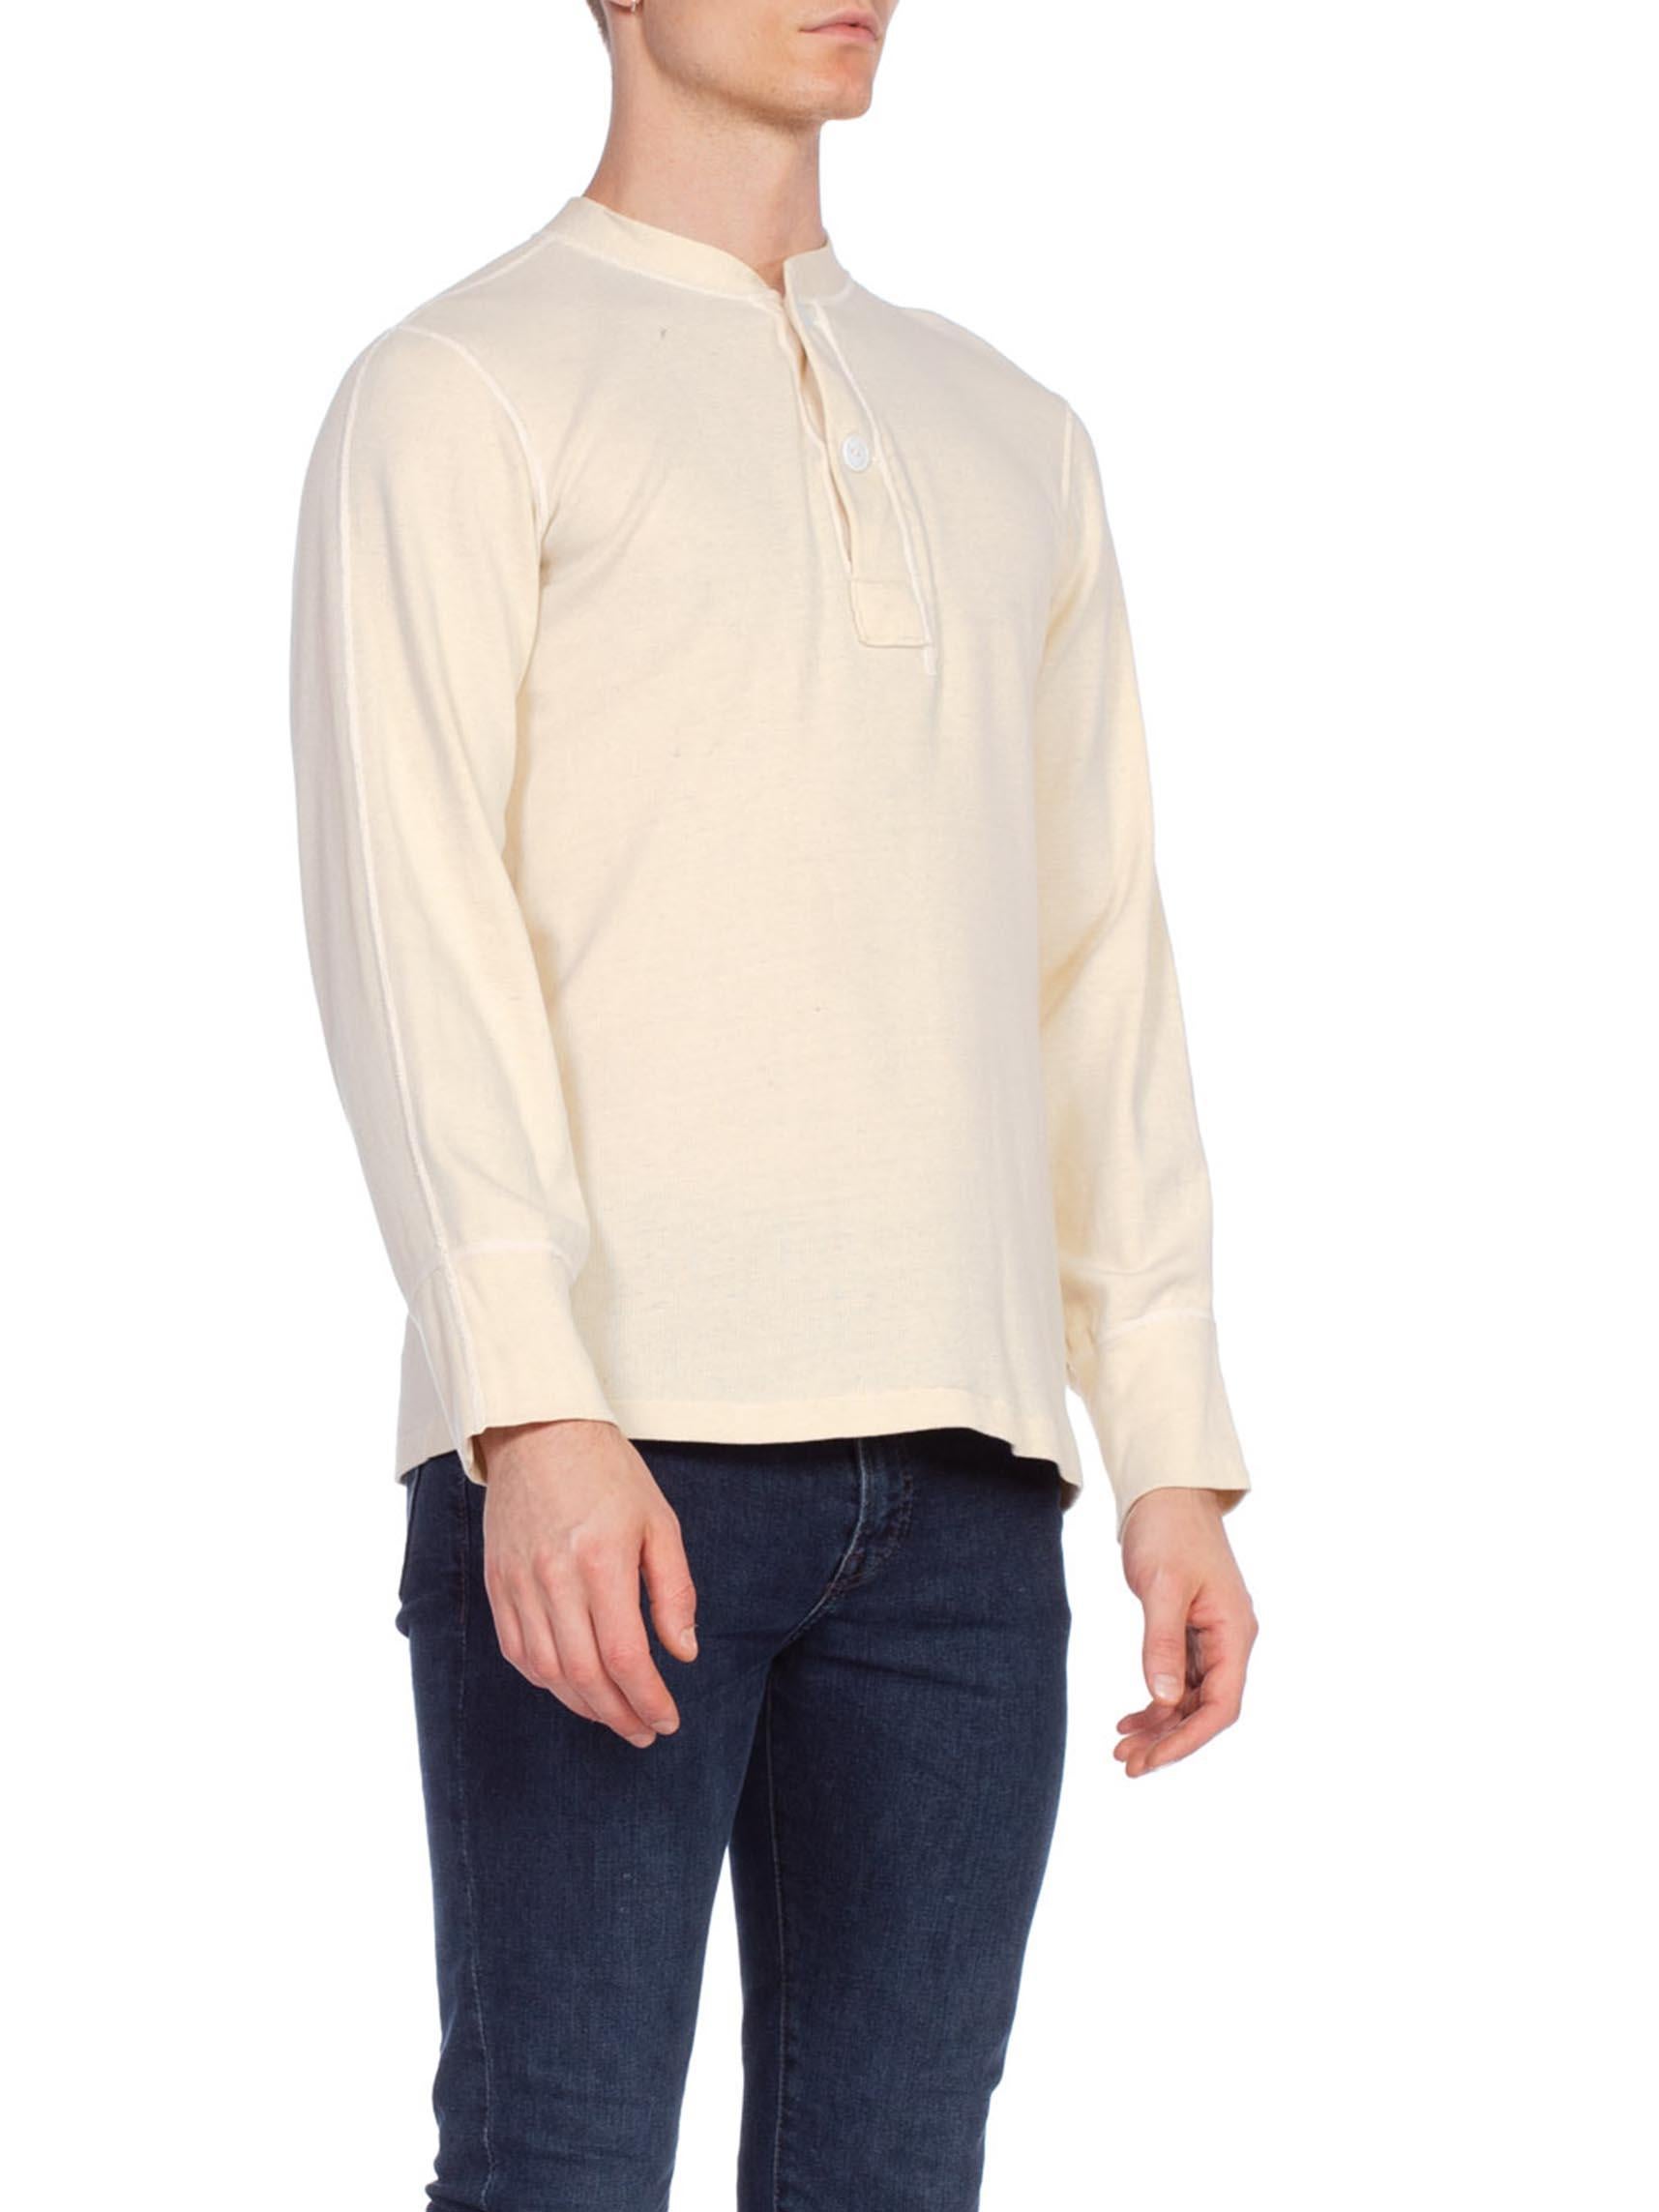 Beige 1940S Cream Wool/Cotton Jersey Men's Military Thermal Shirt For Sale